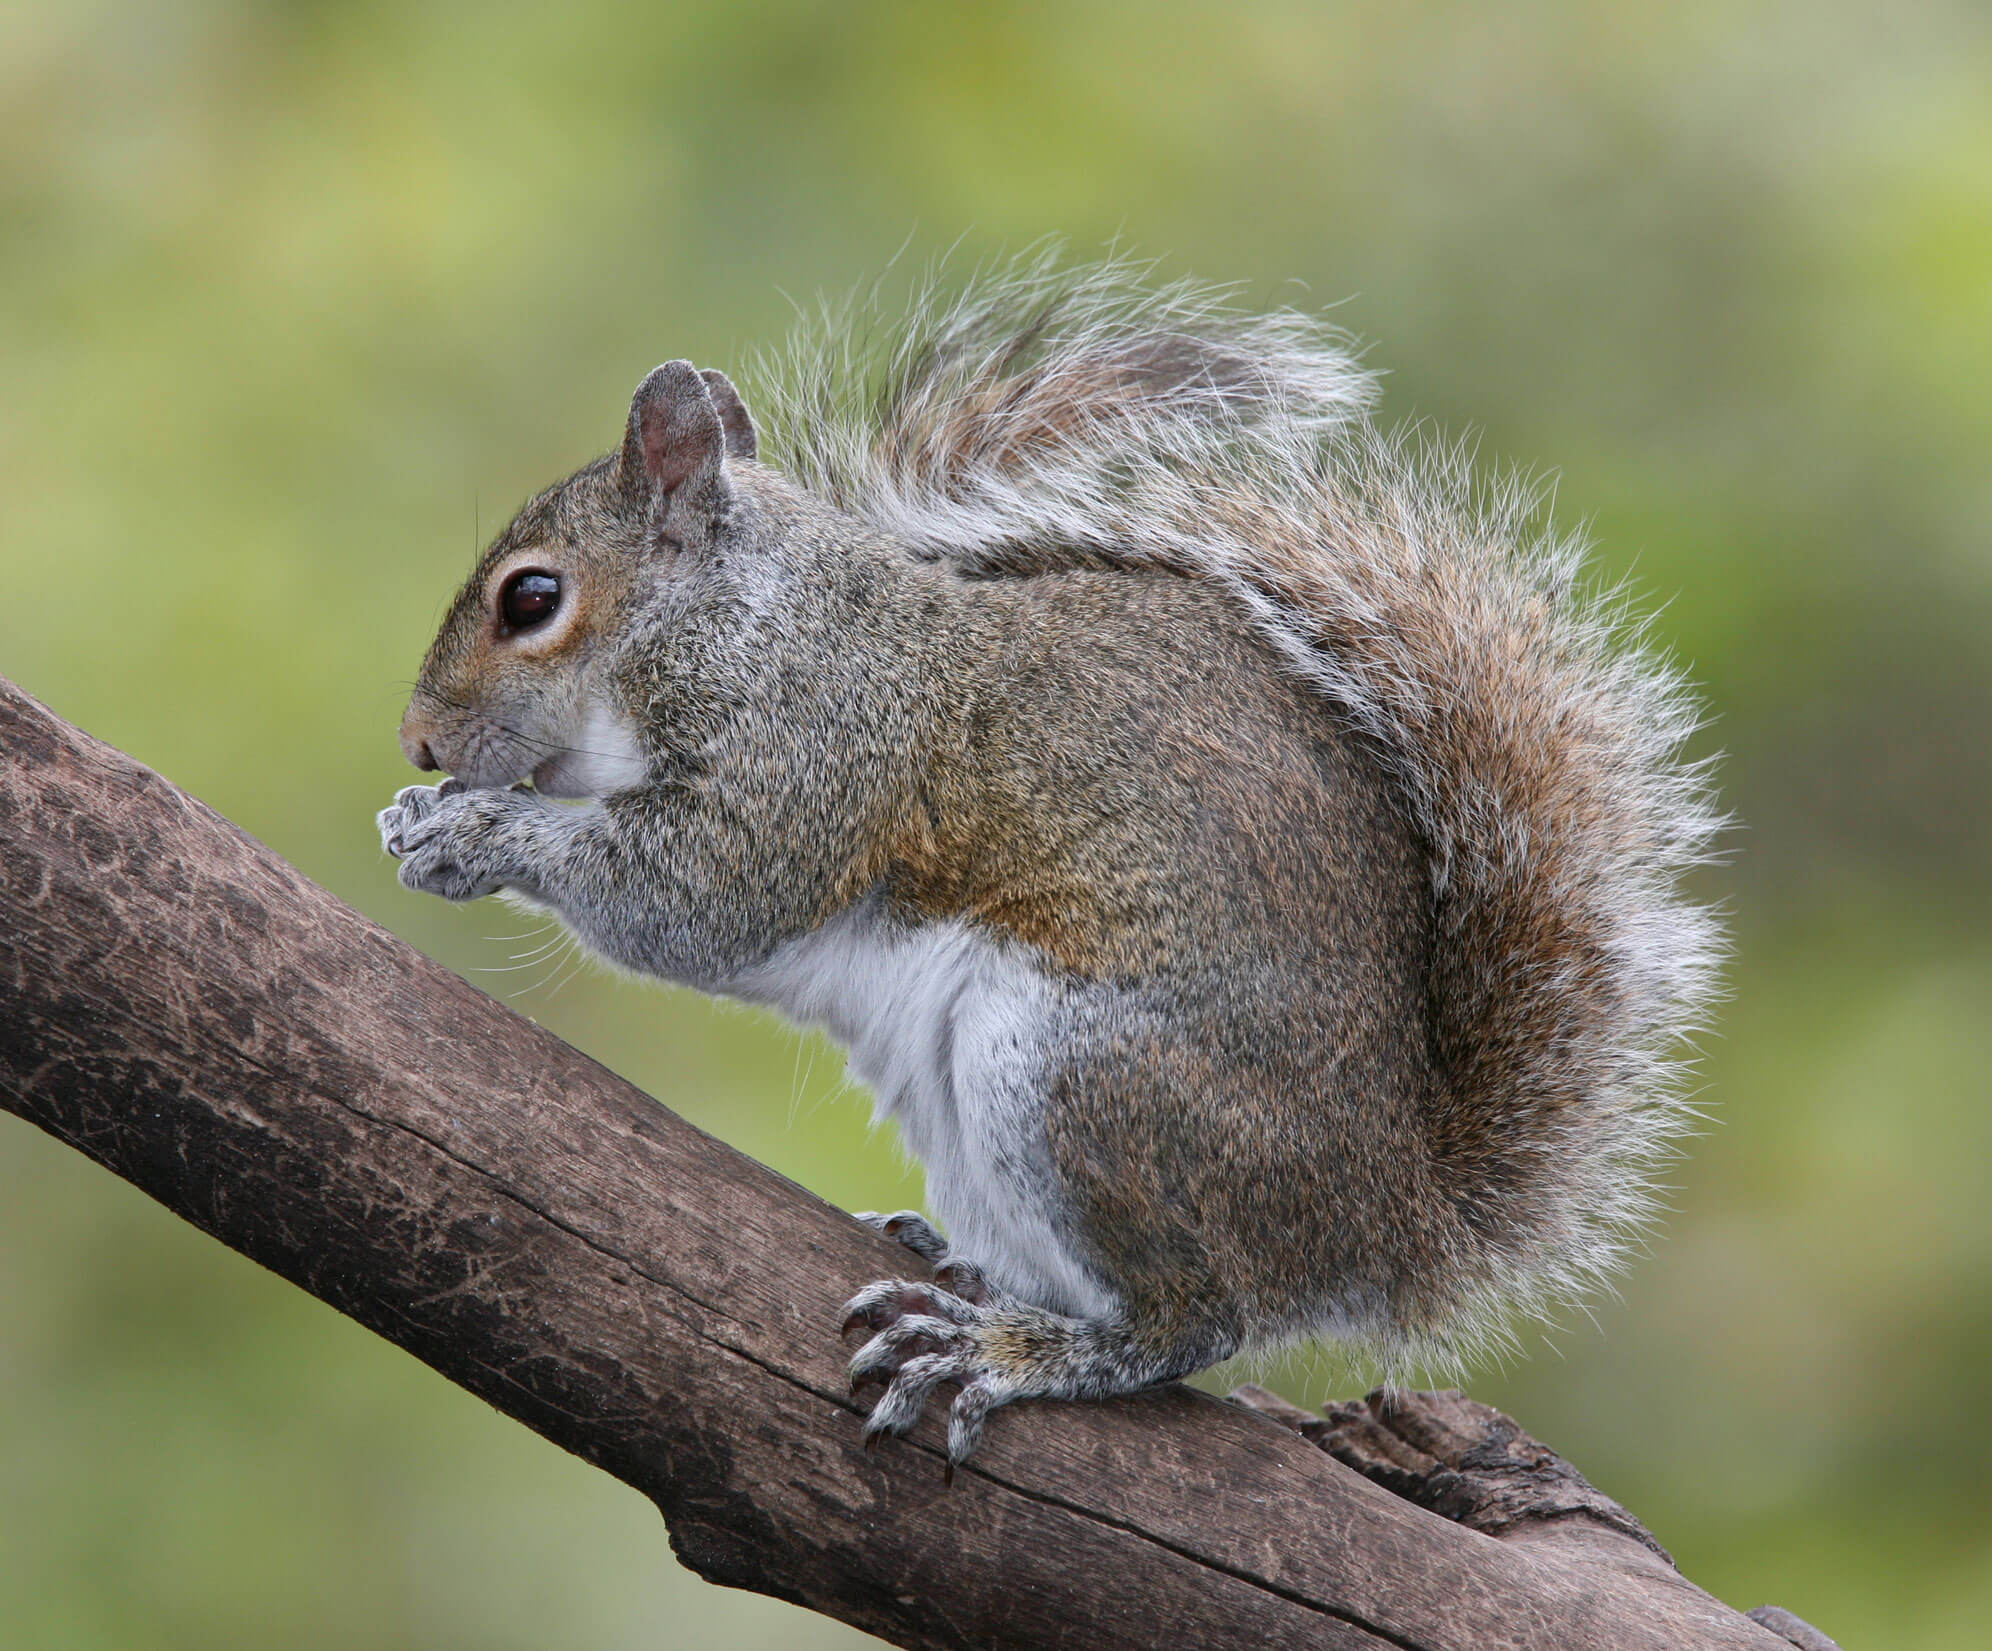 Squirrel Removal Services - Get Rid of Squirrels in Milwaukee